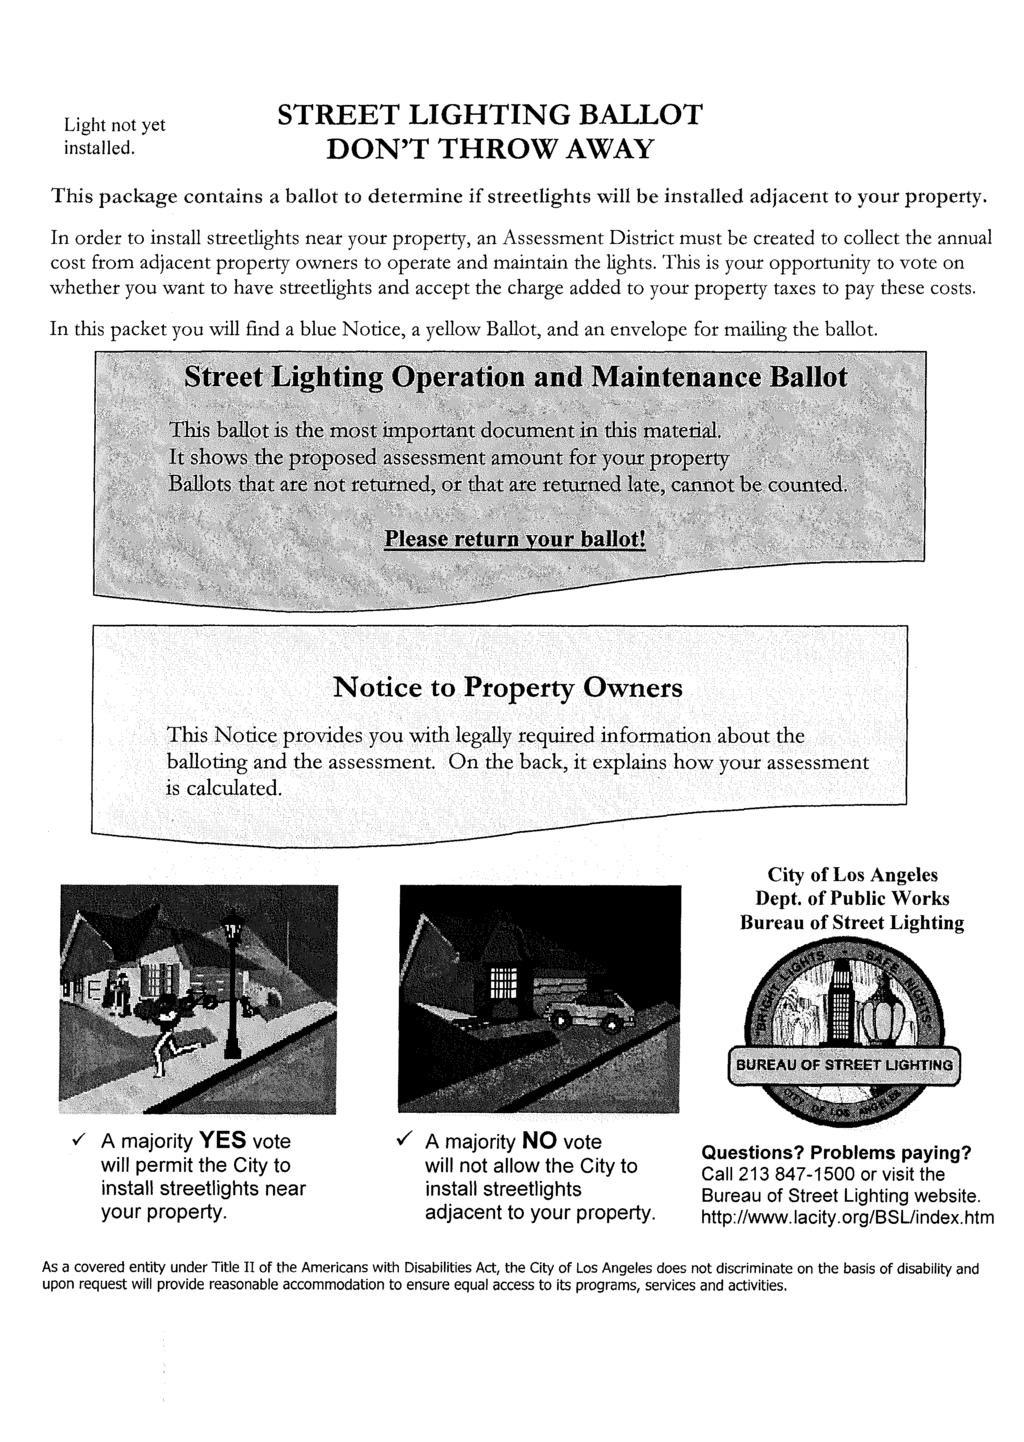 Light not yet installed. STREET LIGHTING BALLOT DON T THROW AWAY This package contains a ballot to determine if streetlights will be installed adjacent to your property.